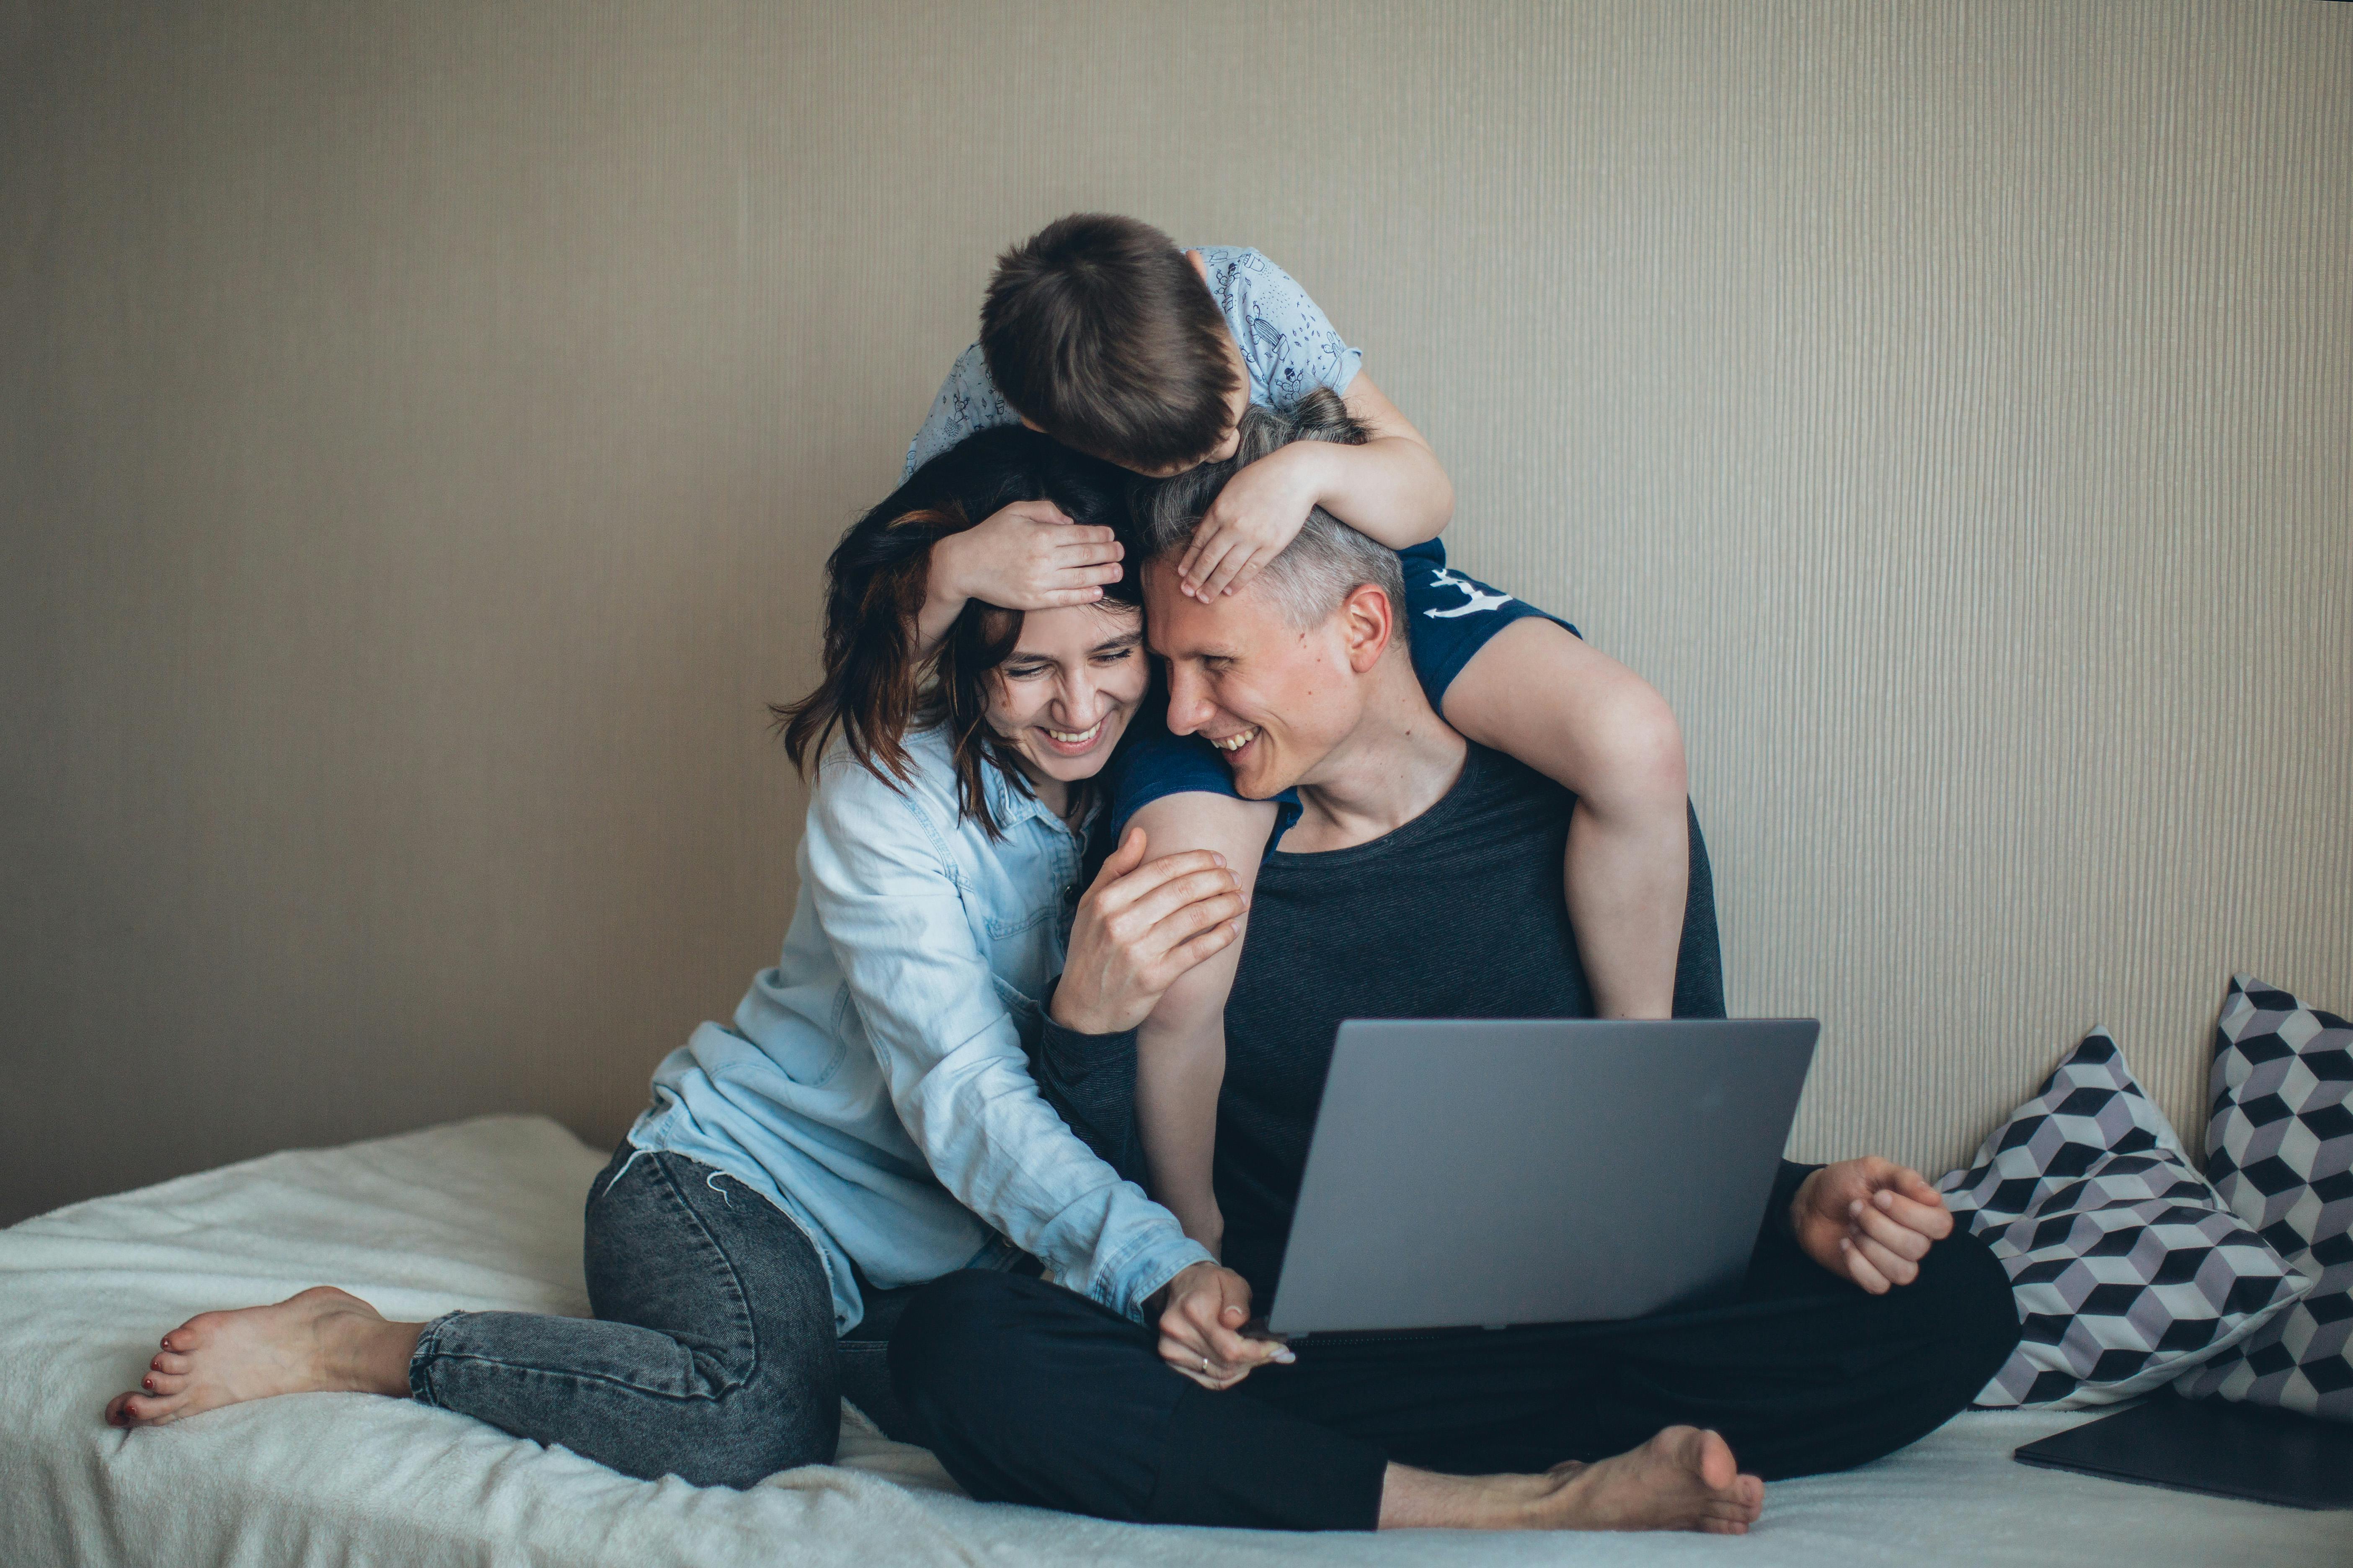 A couple bonding with their son | Source: Pexels